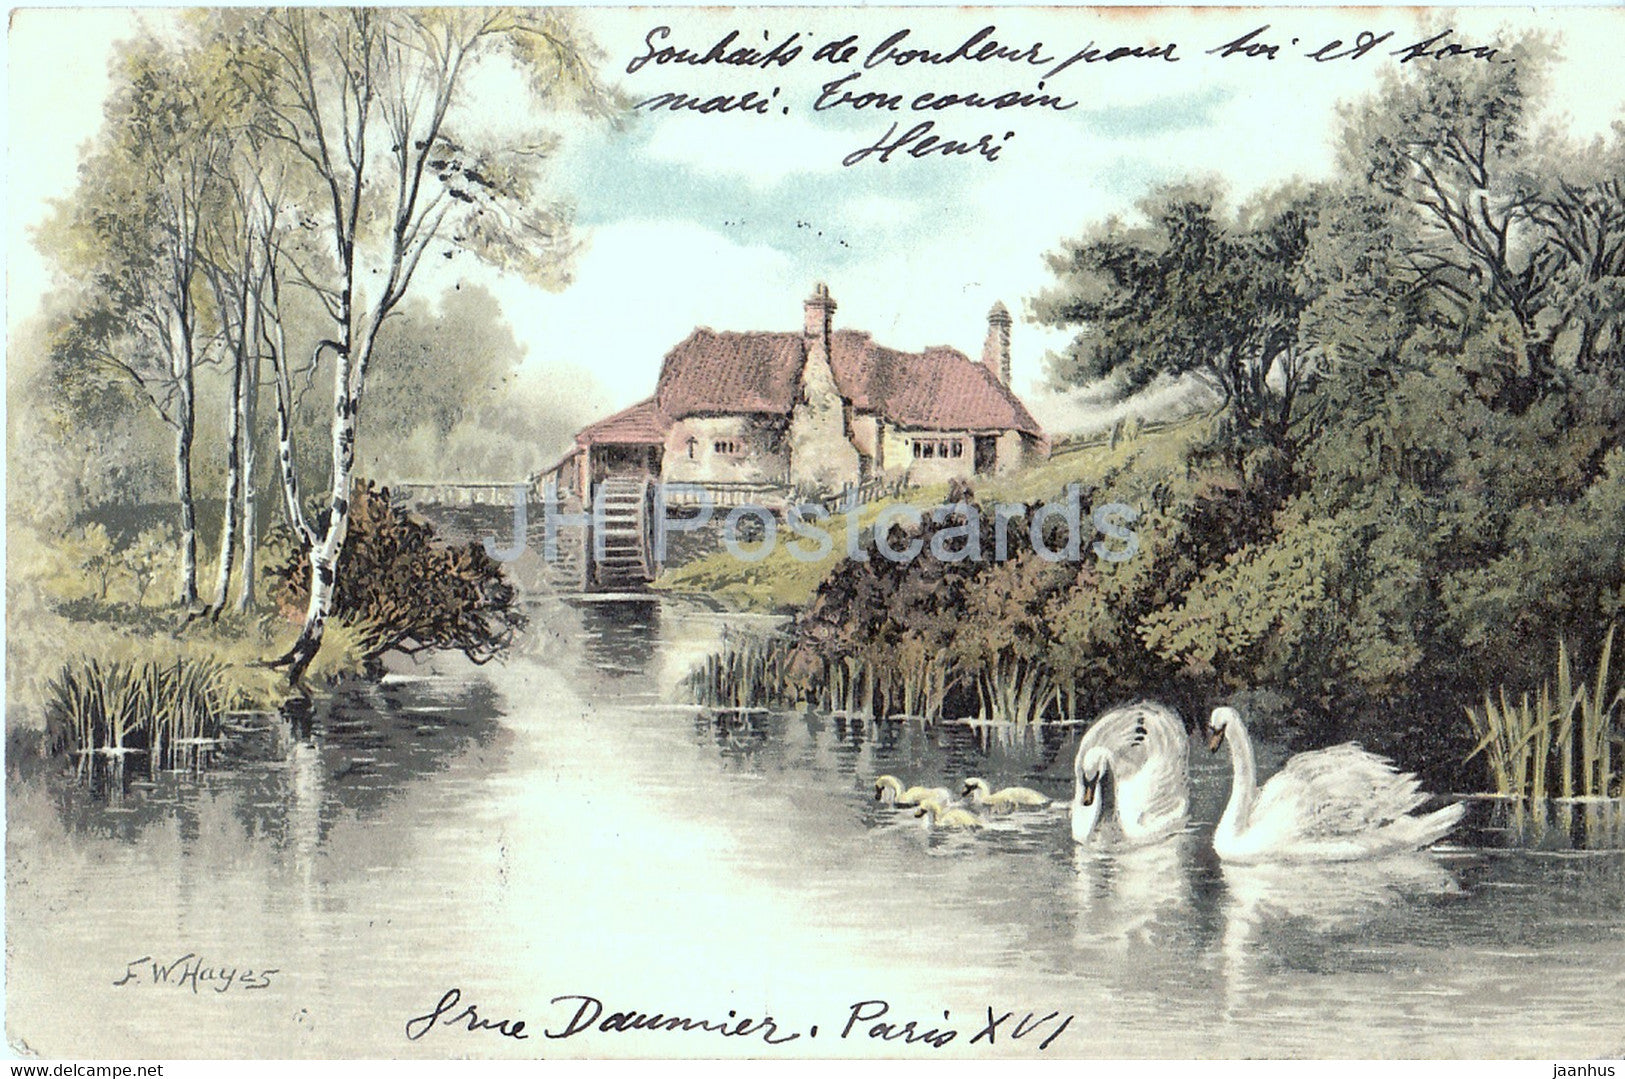 watermill - swan - illustration by F W Hayes - Serie 1189 - old postcard - 1904 - Germany - used - JH Postcards